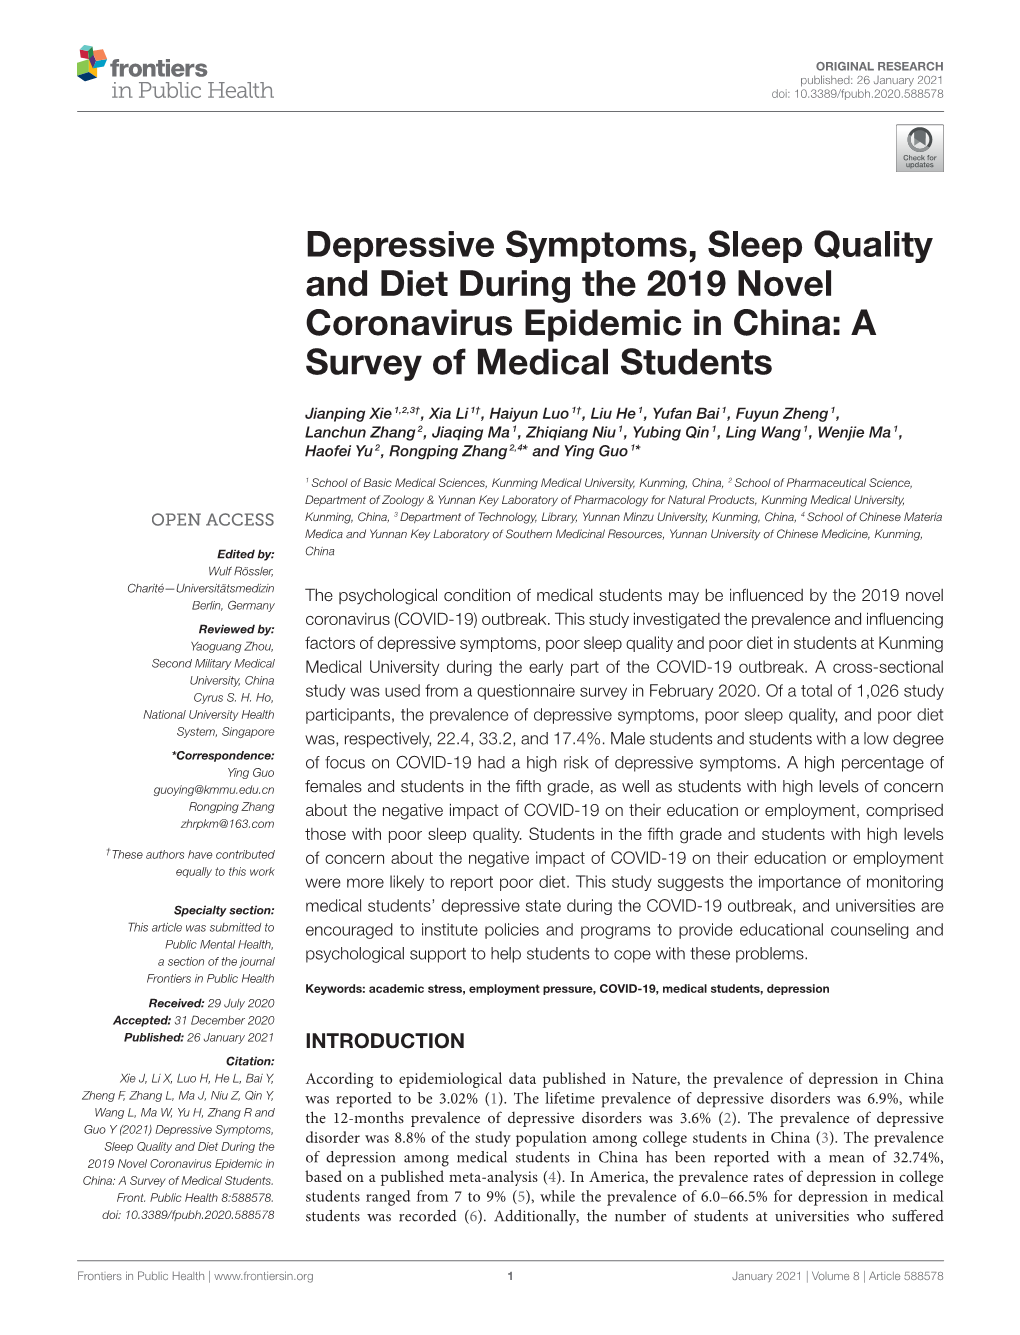 Depressive Symptoms, Sleep Quality and Diet During the 2019 Novel Coronavirus Epidemic in China: a Survey of Medical Students